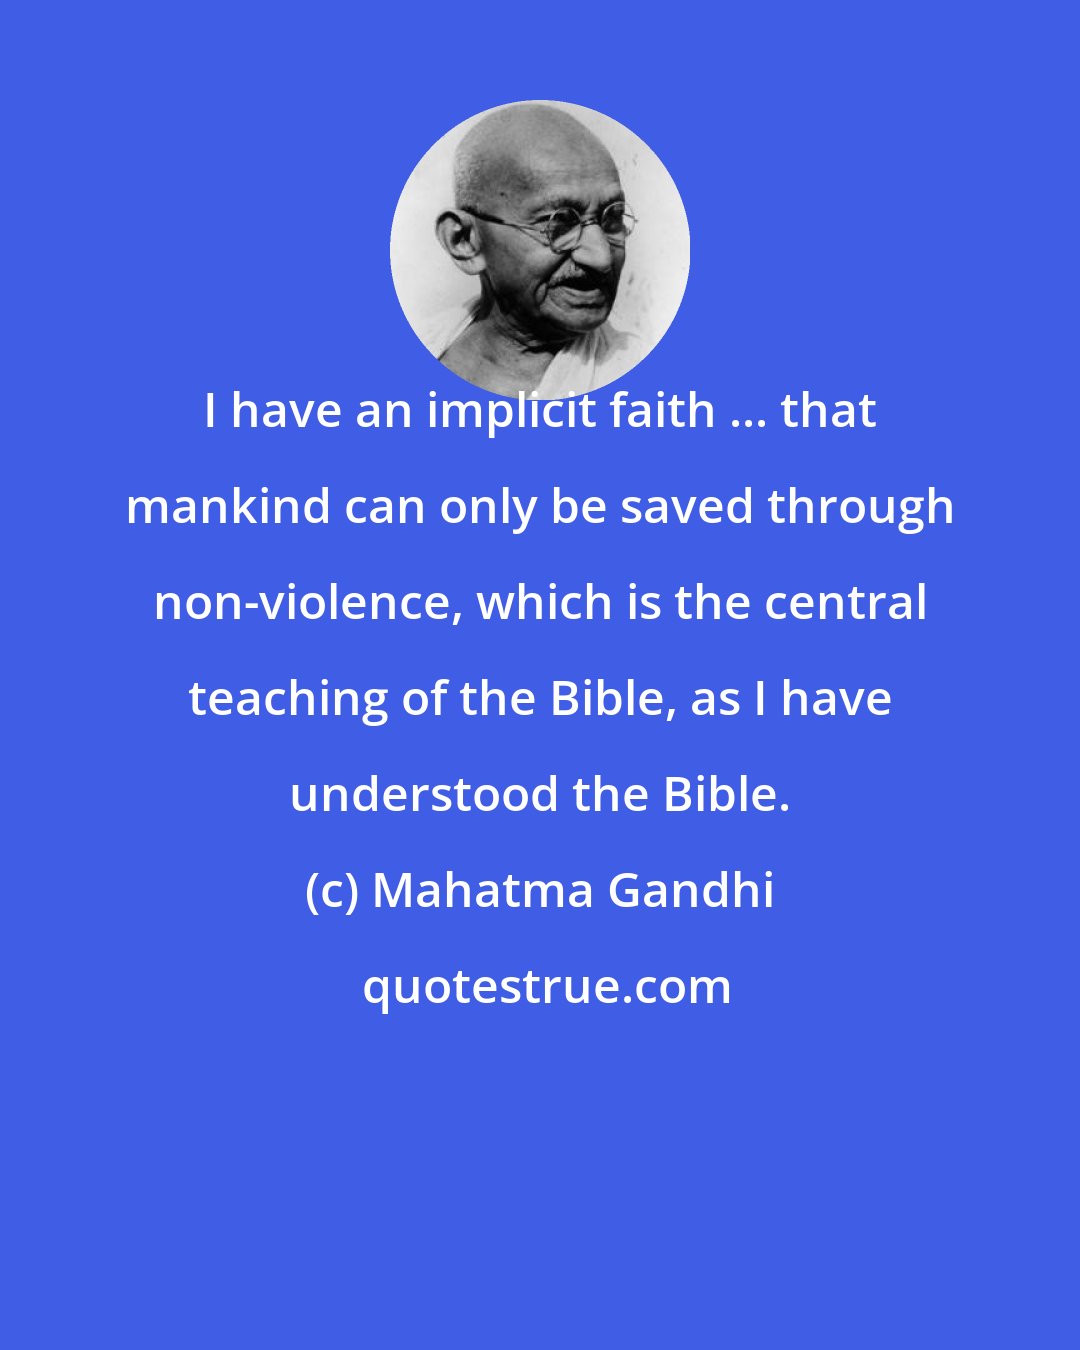 Mahatma Gandhi: I have an implicit faith ... that mankind can only be saved through non-violence, which is the central teaching of the Bible, as I have understood the Bible.